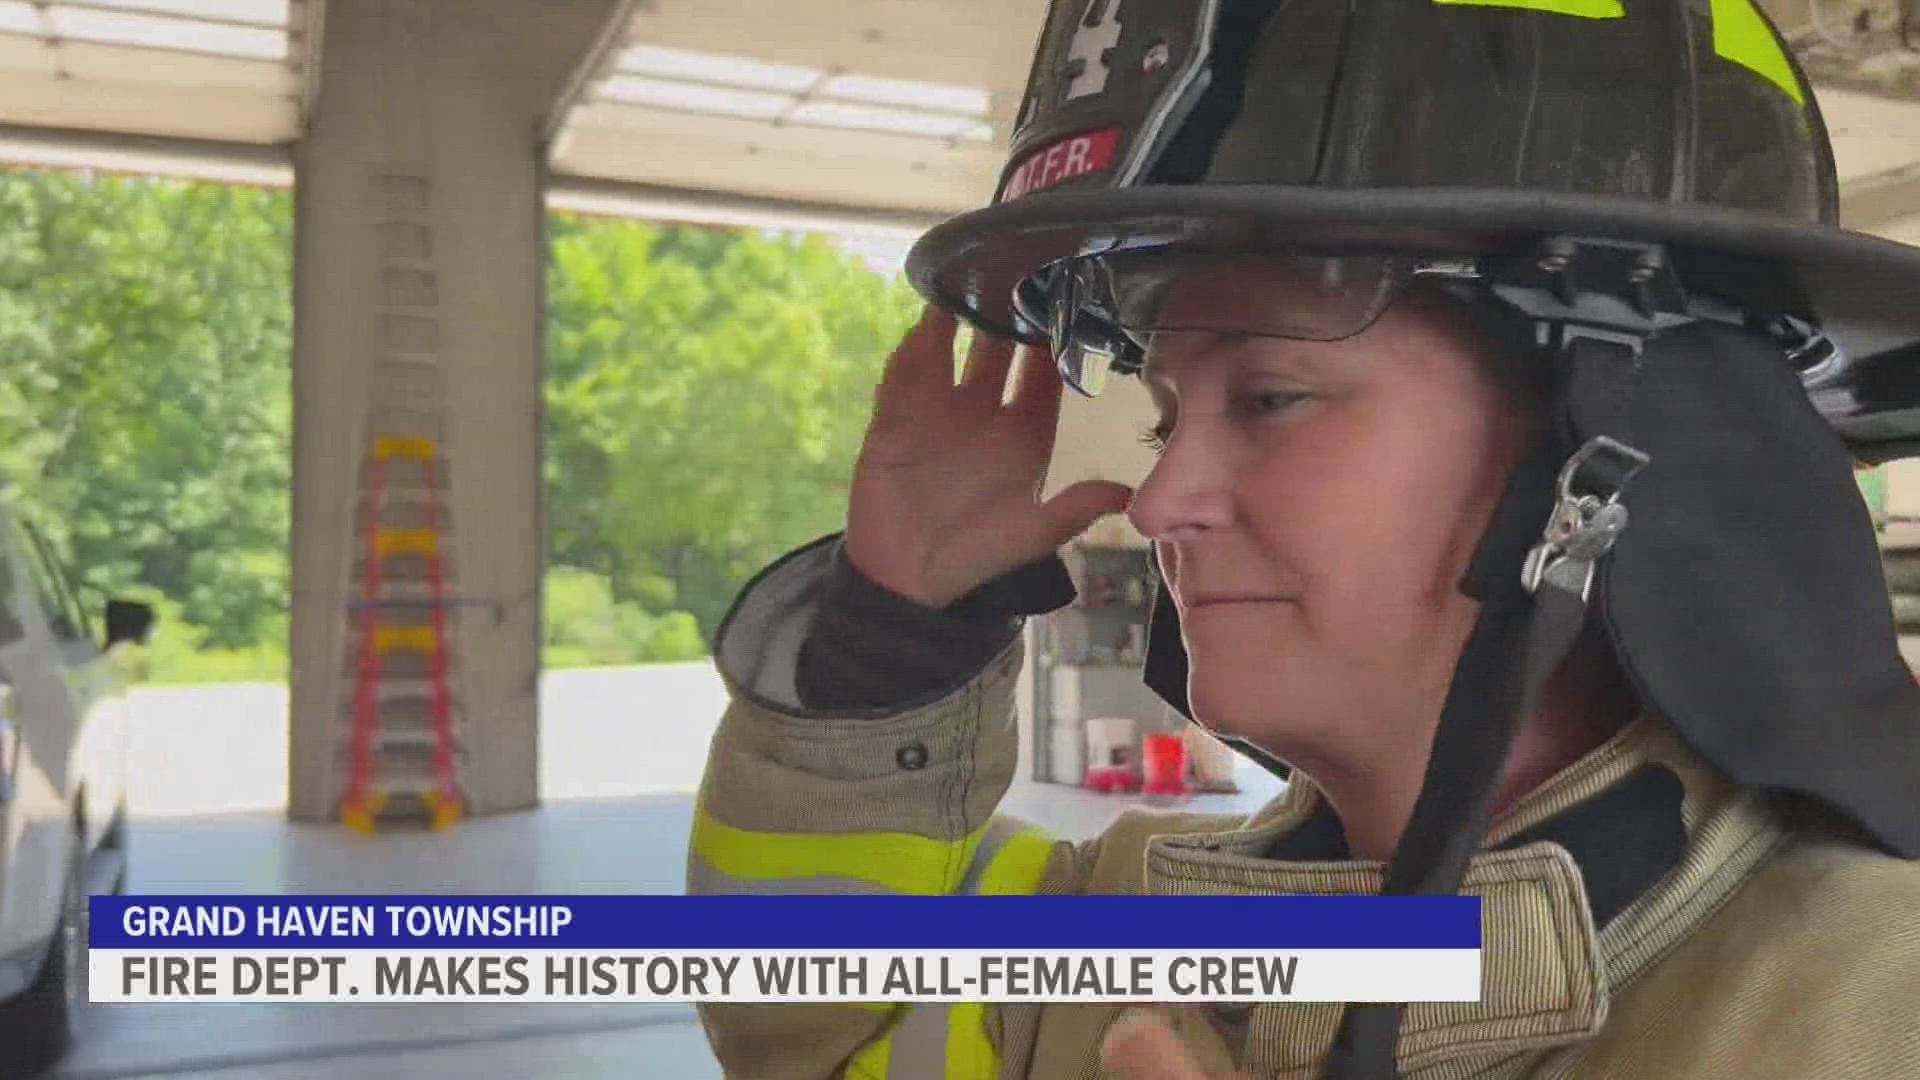 An all-female crew headed the Grand Haven Twp. Fire and Rescue Station for the first time in more than 70 years.